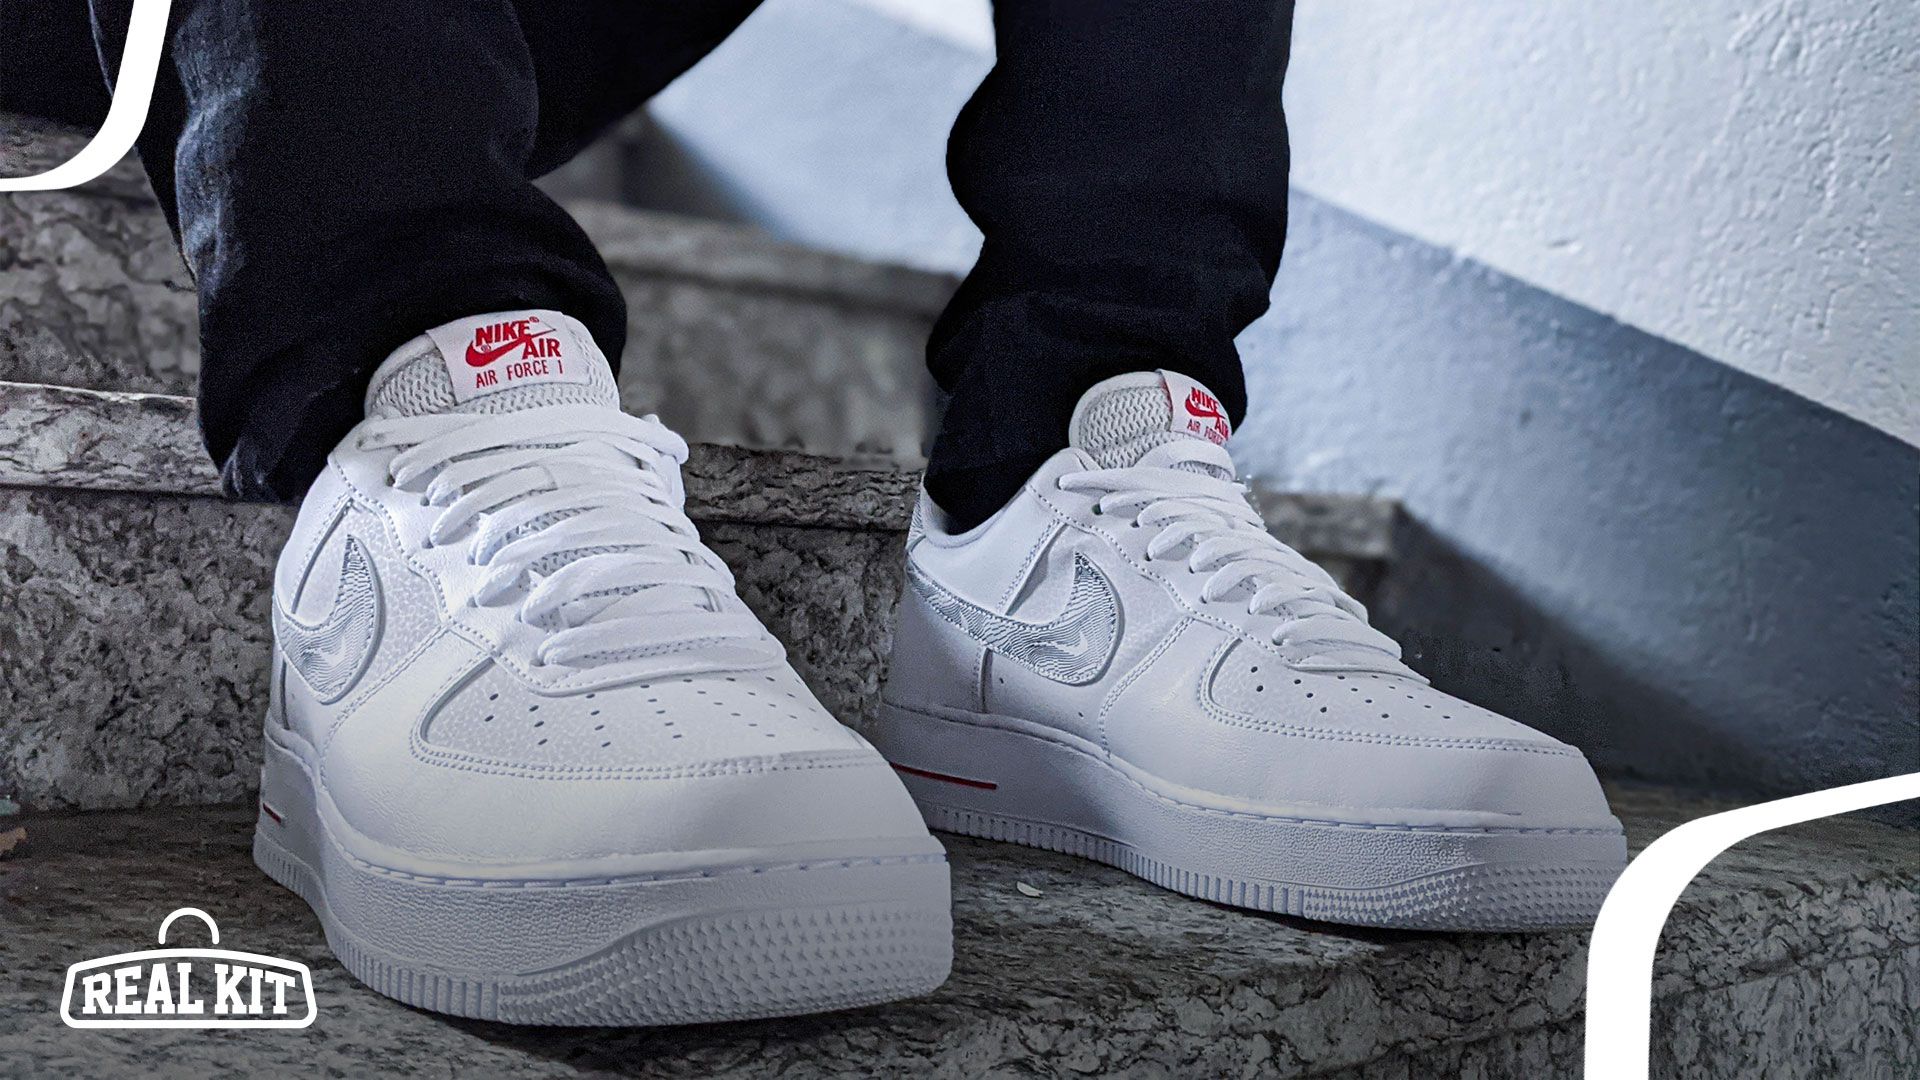 what do you use to clean air force ones